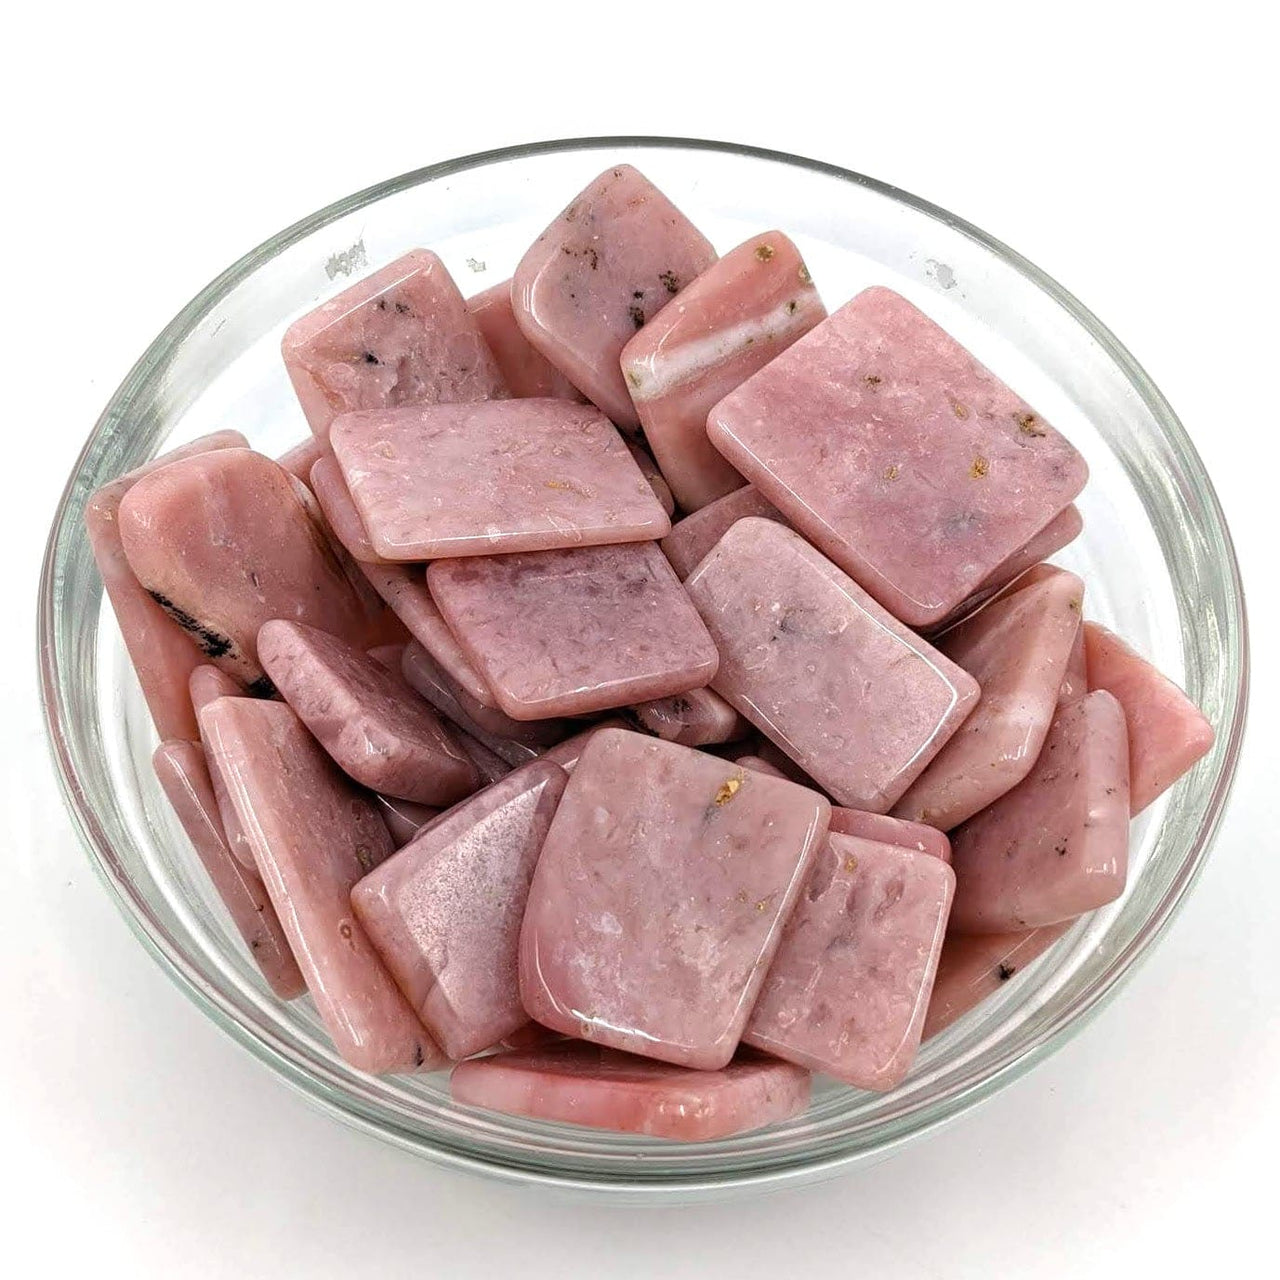 Raw pork pieces in a bowl beside Pink Opal Slice #SK7405, perfect for gourmet cooking